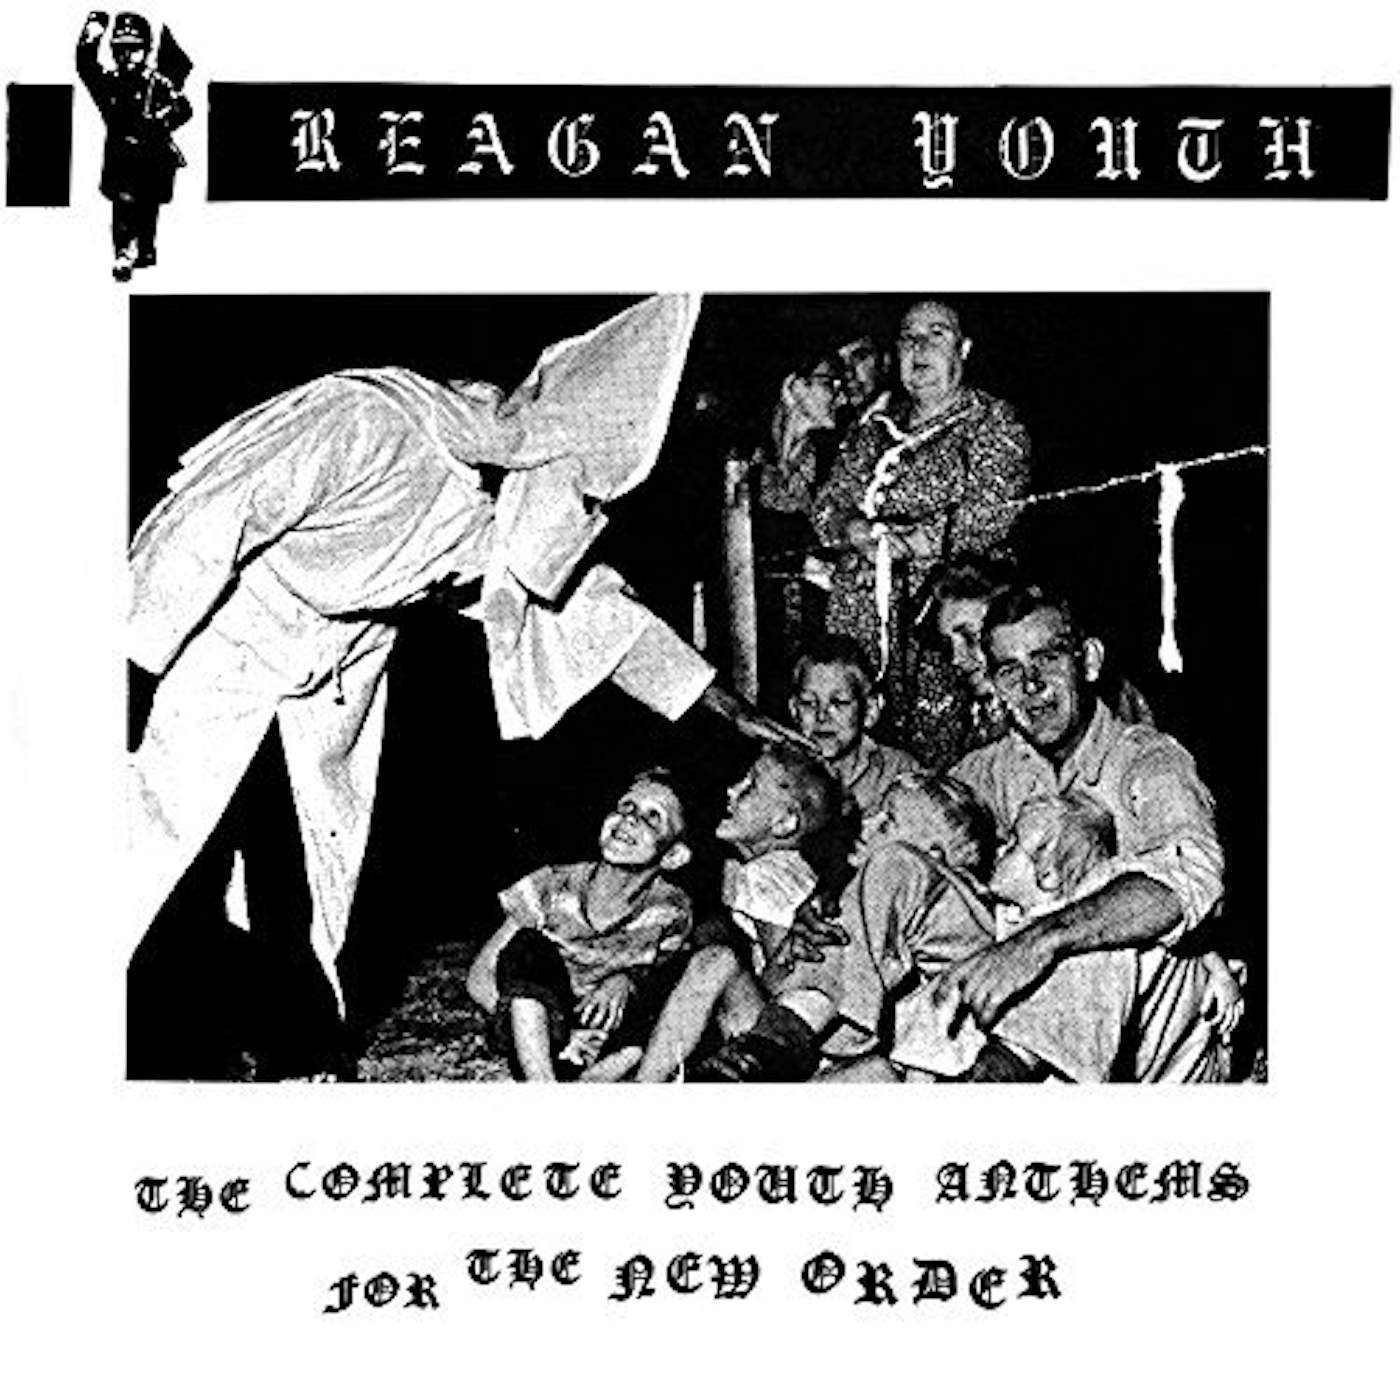 Reagan Youth COMPLETE YOUTH ANTHEMS FOR THE NEW ORDER CD